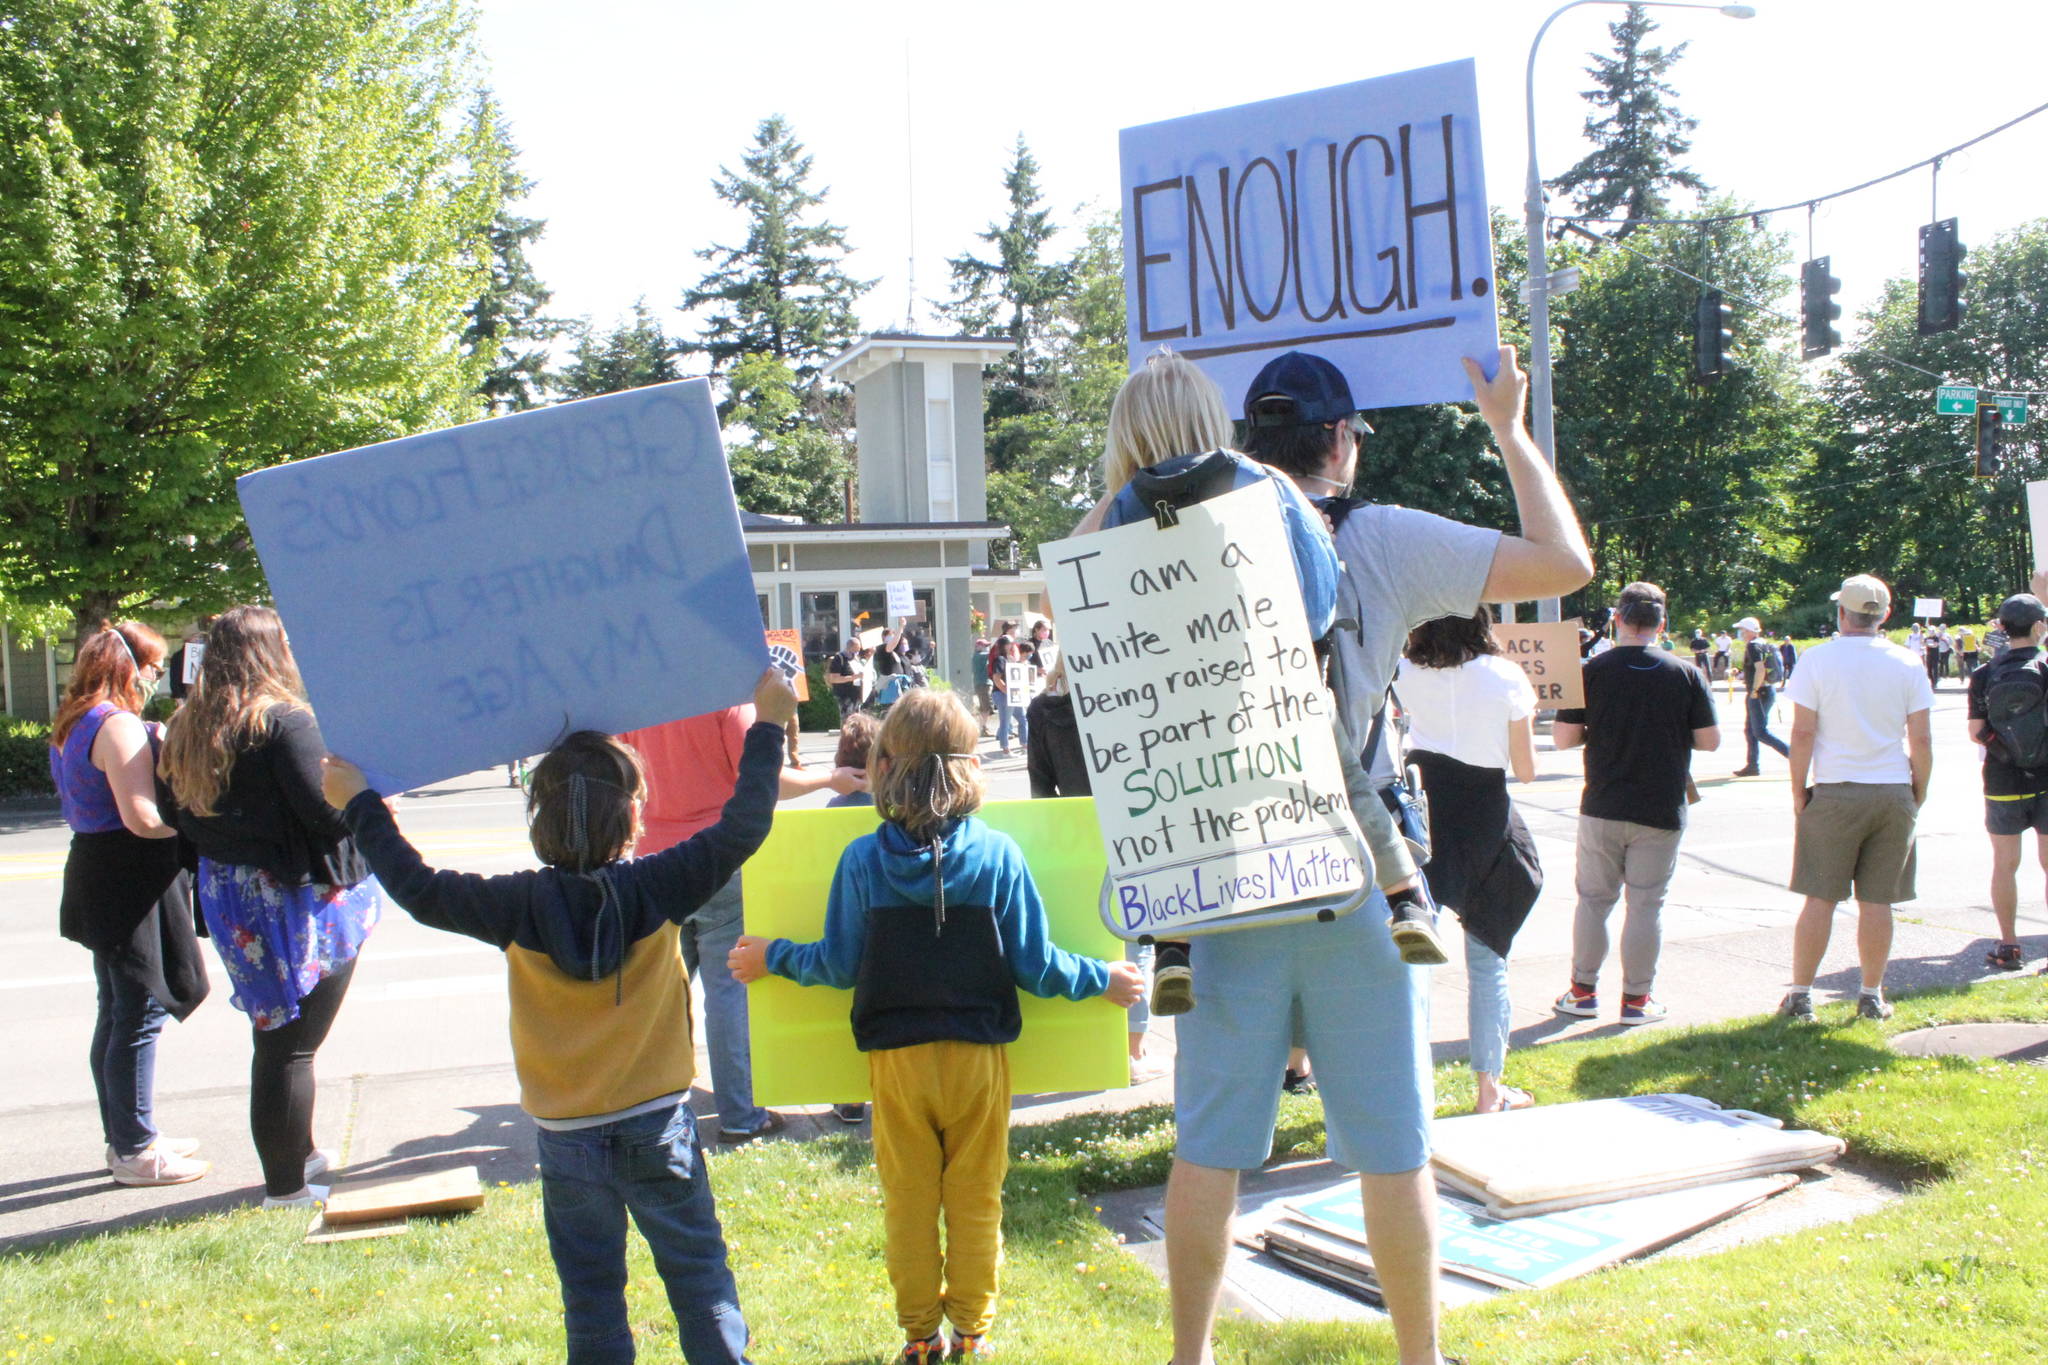 Gallery | Demonstrators gather in Winslow to call for racial equity